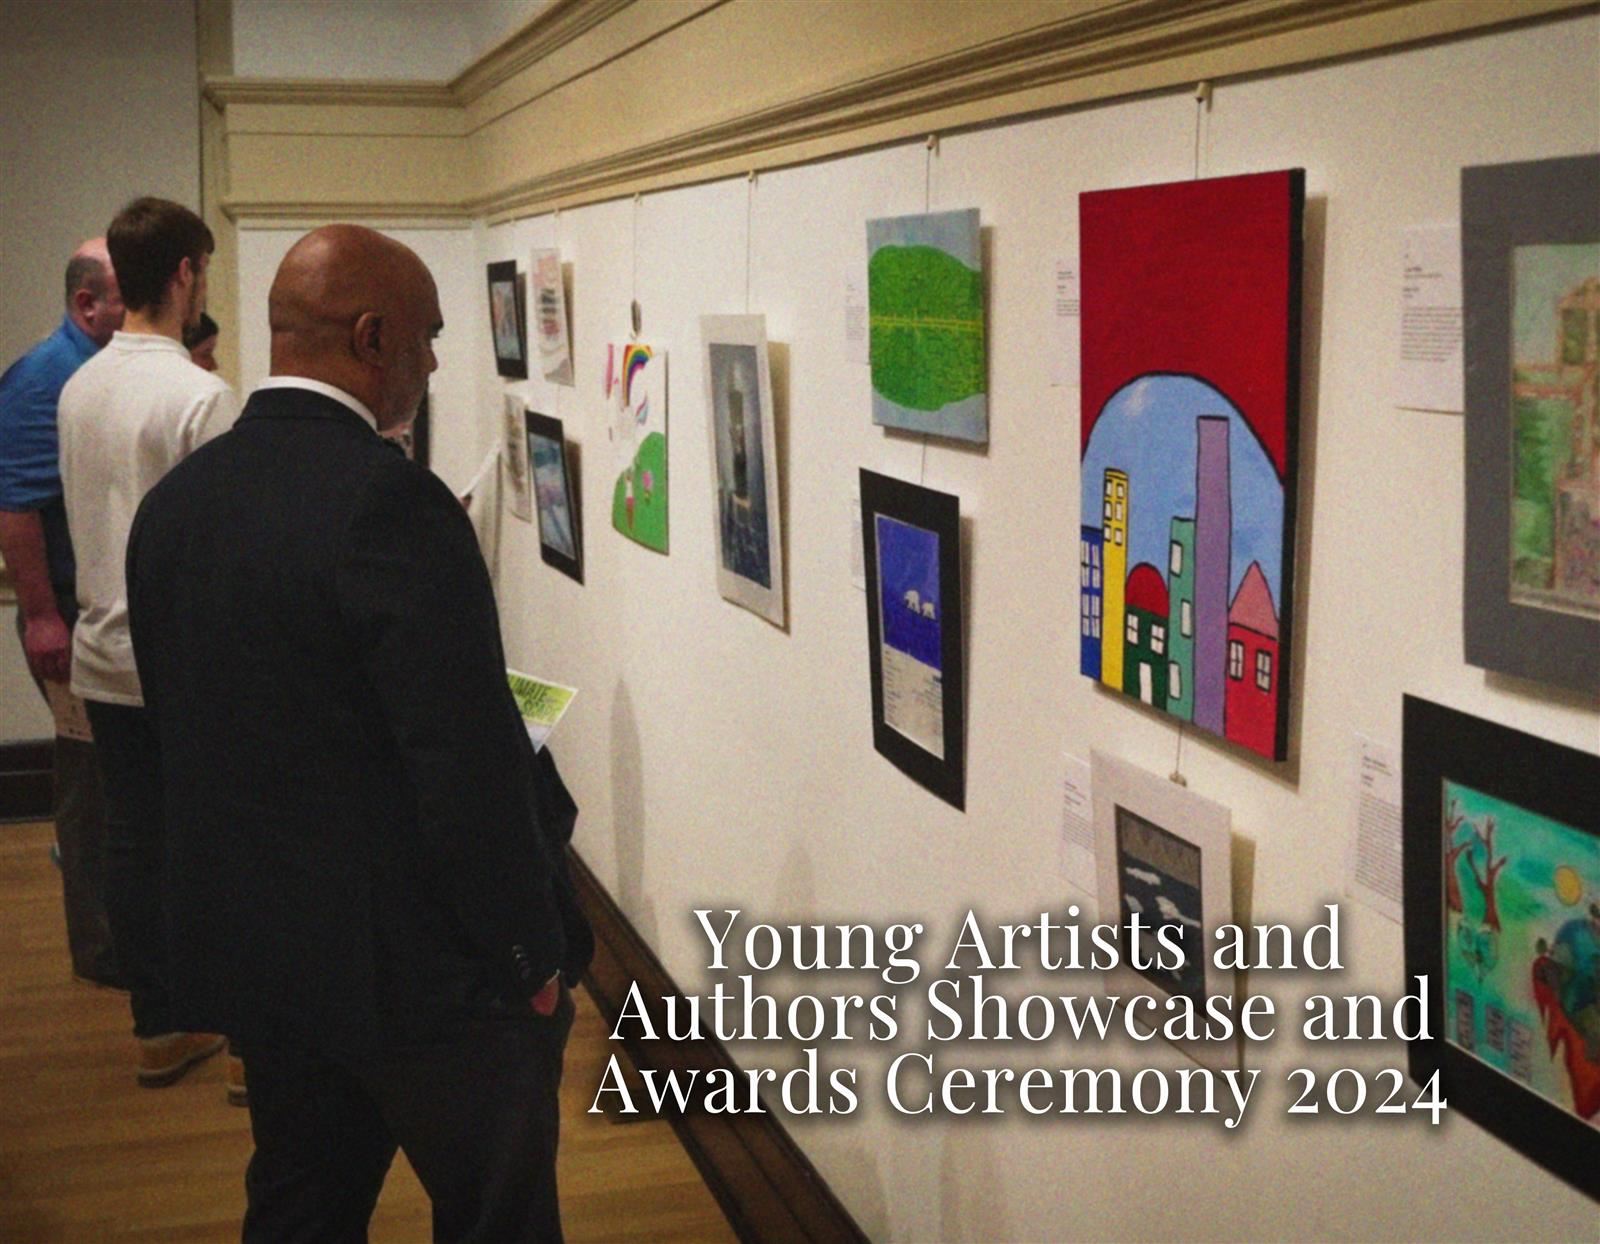  35th Annual Young Artists and Authors Showcase and Awards Ceremony